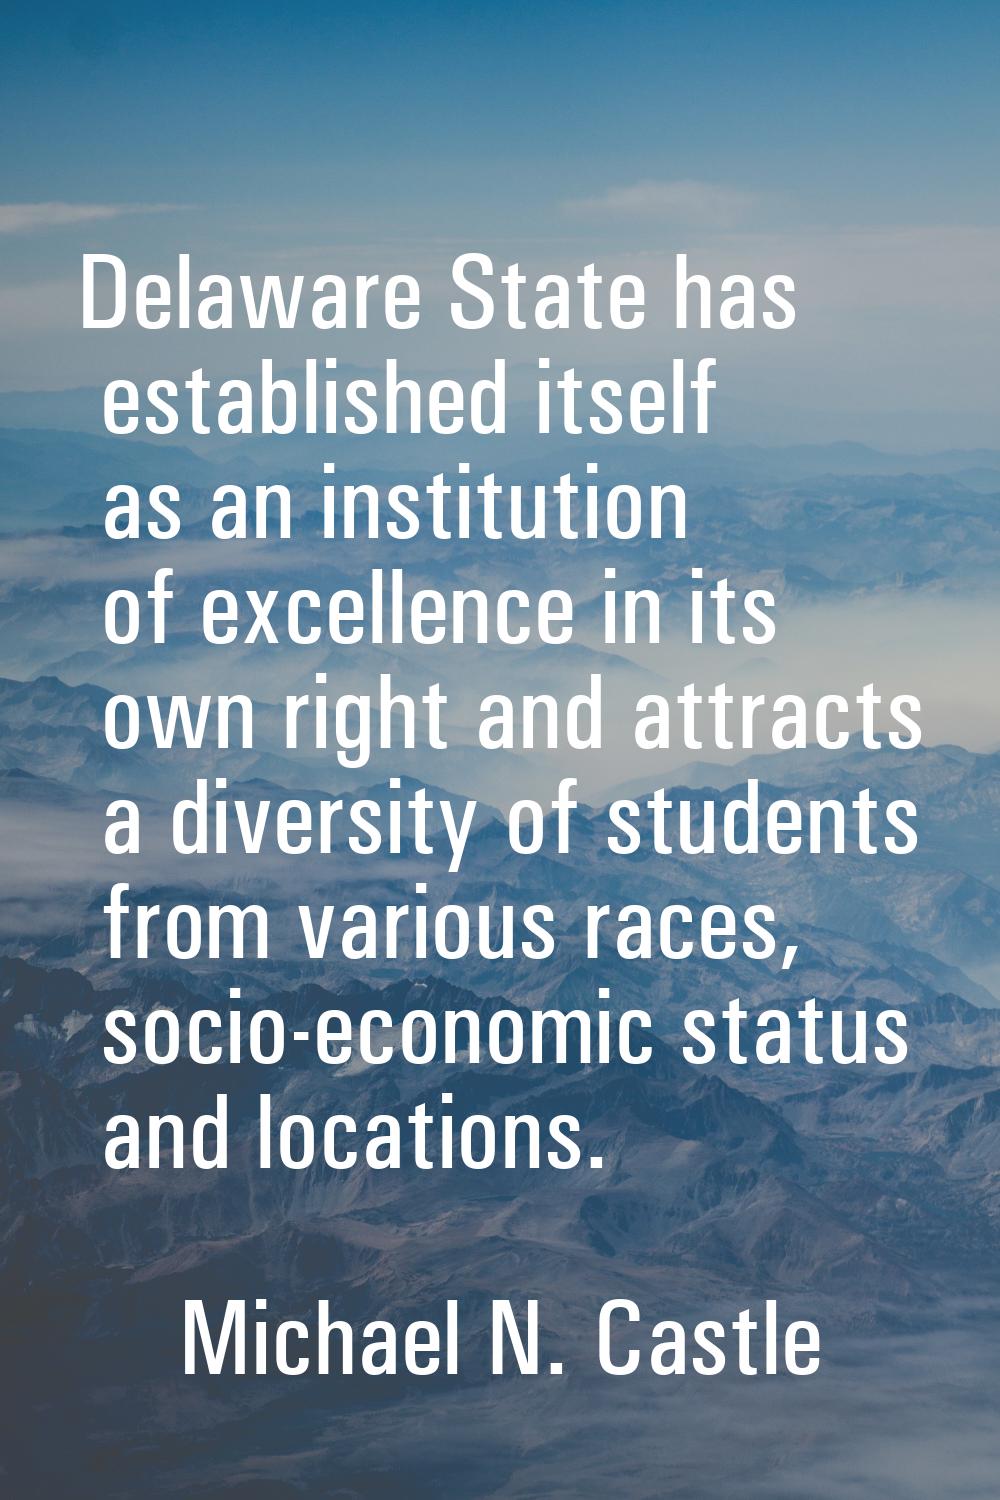 Delaware State has established itself as an institution of excellence in its own right and attracts